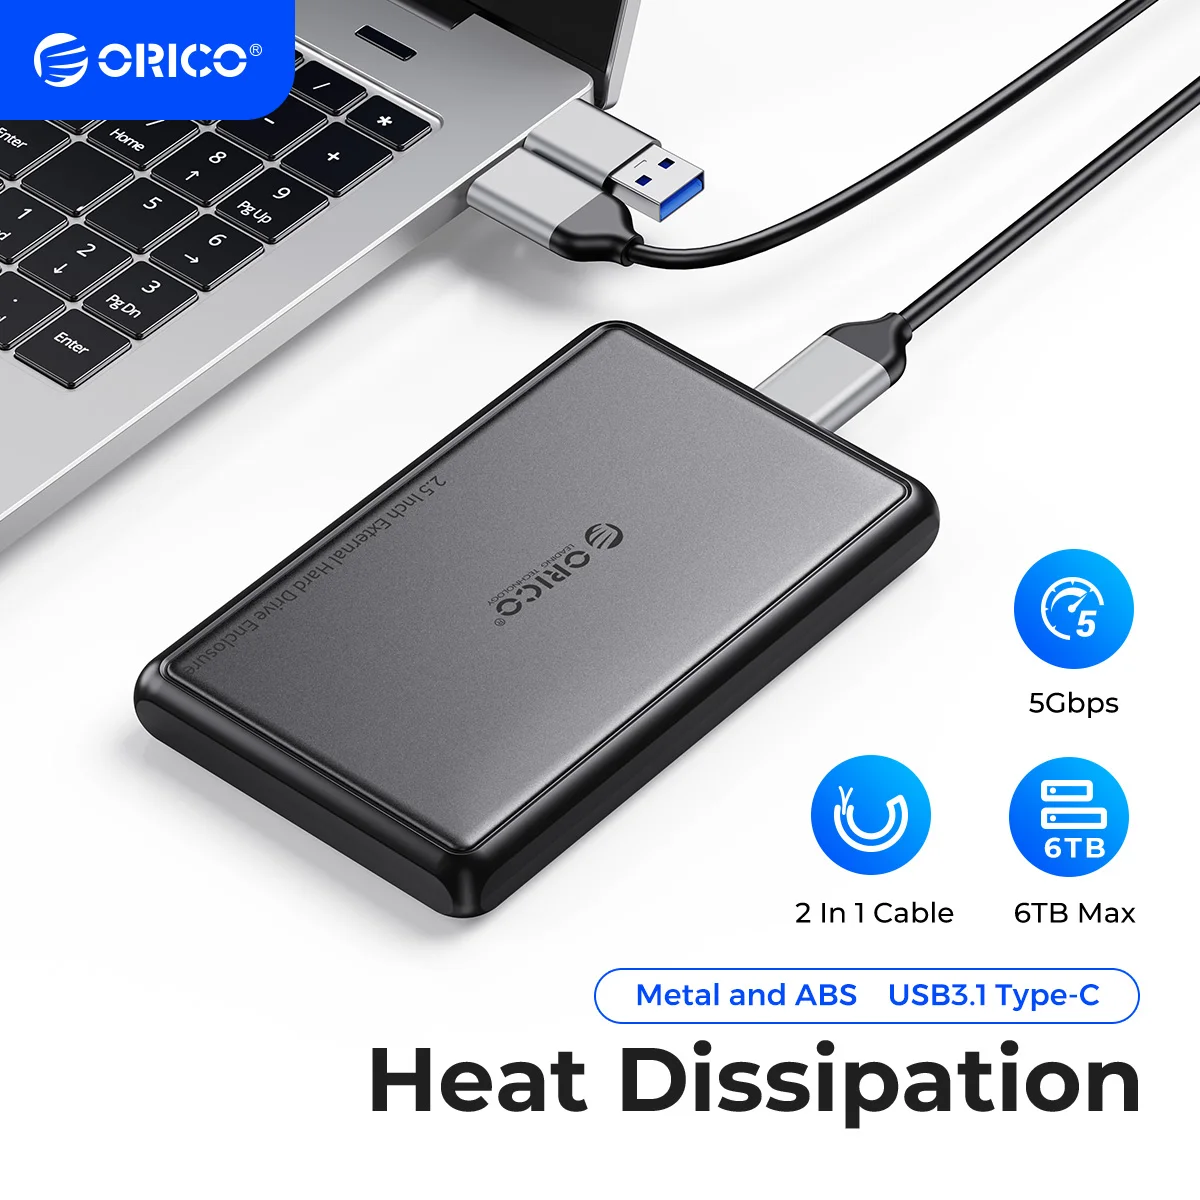 

ORICO 2.5 Inch External HDD Case 5Gbps SATA to Type-C Hard Drive Enclosure for SSD HDD PC Laptop Metal+ABS Case Heat Dissipation